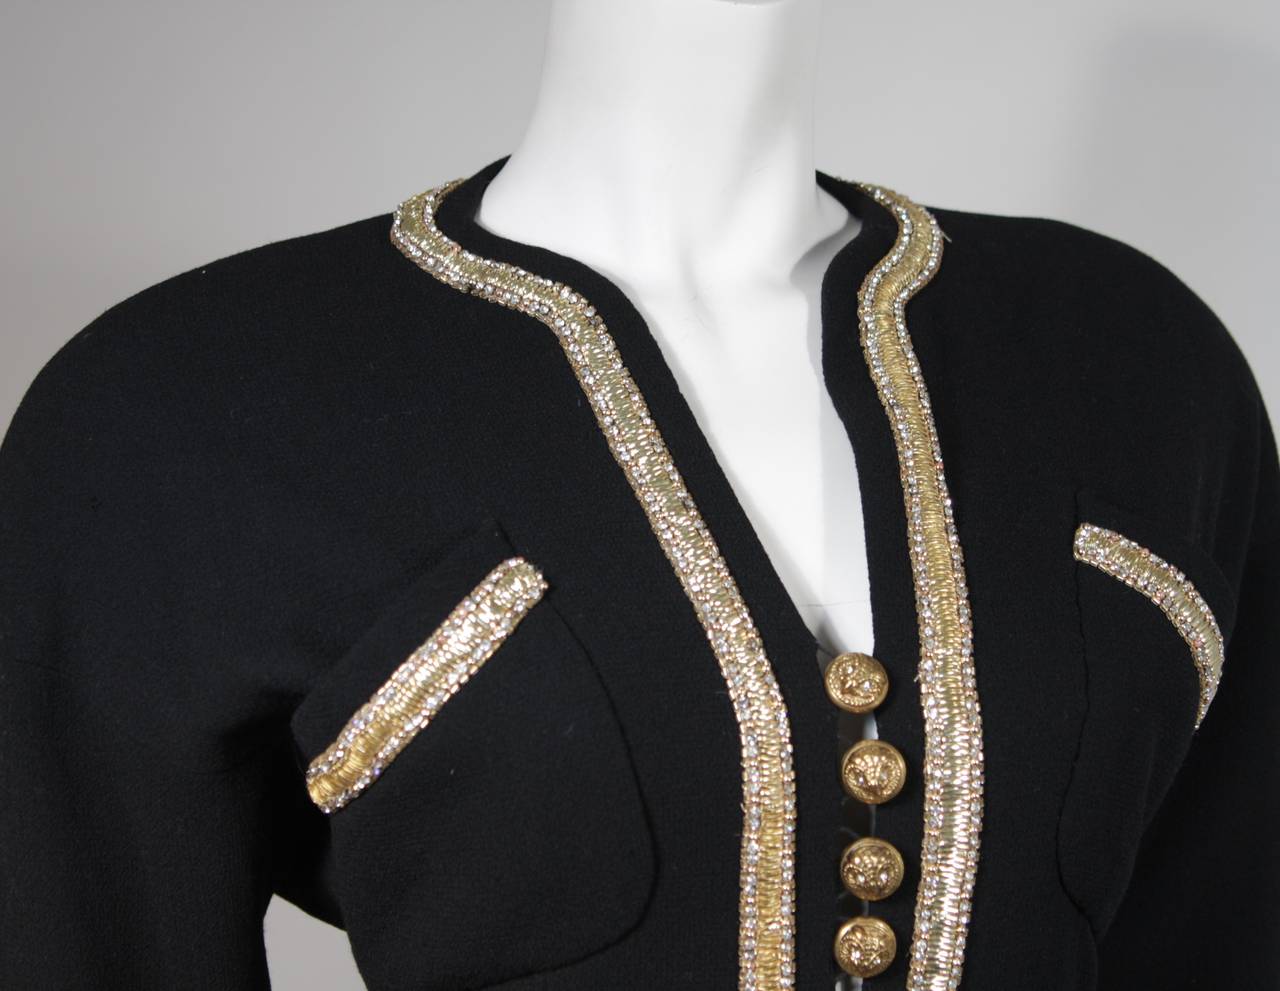 Women's 1980's Chanel Haute Couture Black Skirt Suit with Gold Embellished Trim Size 34